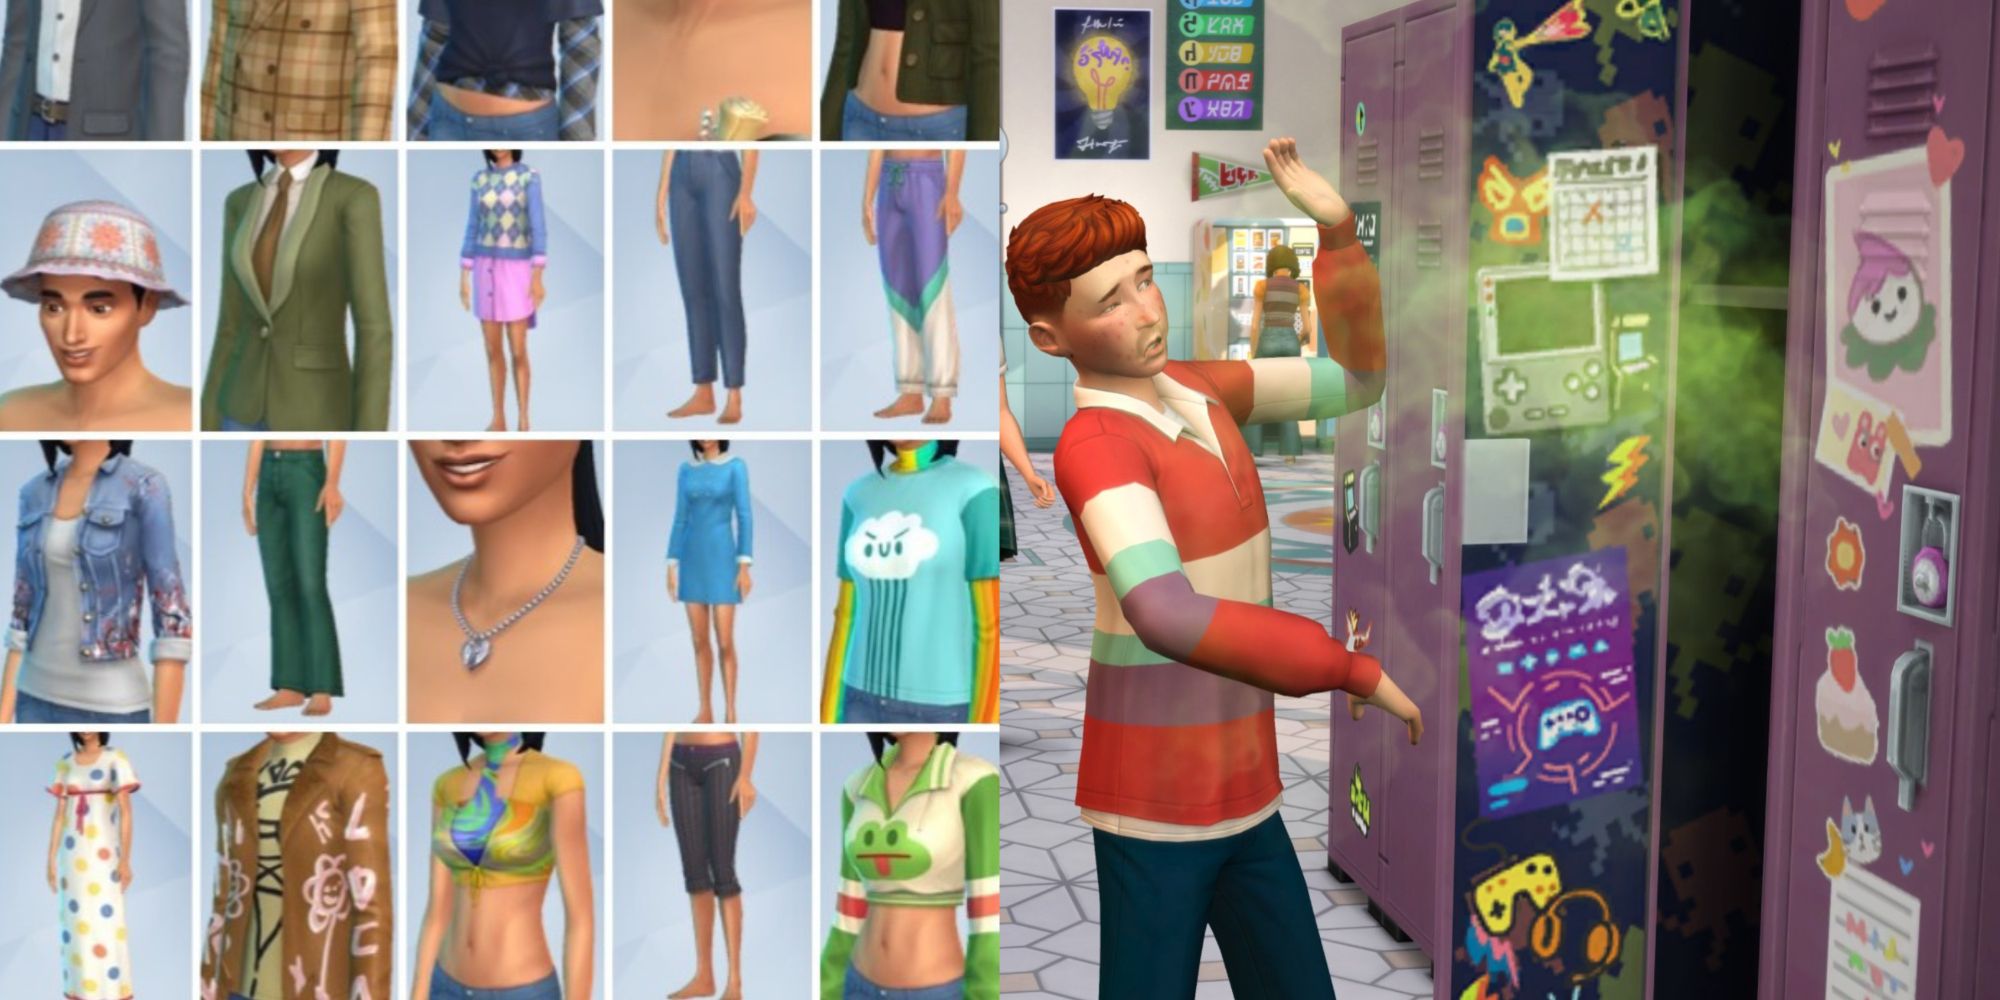 High School Lockers and Outfits in The Sims 4